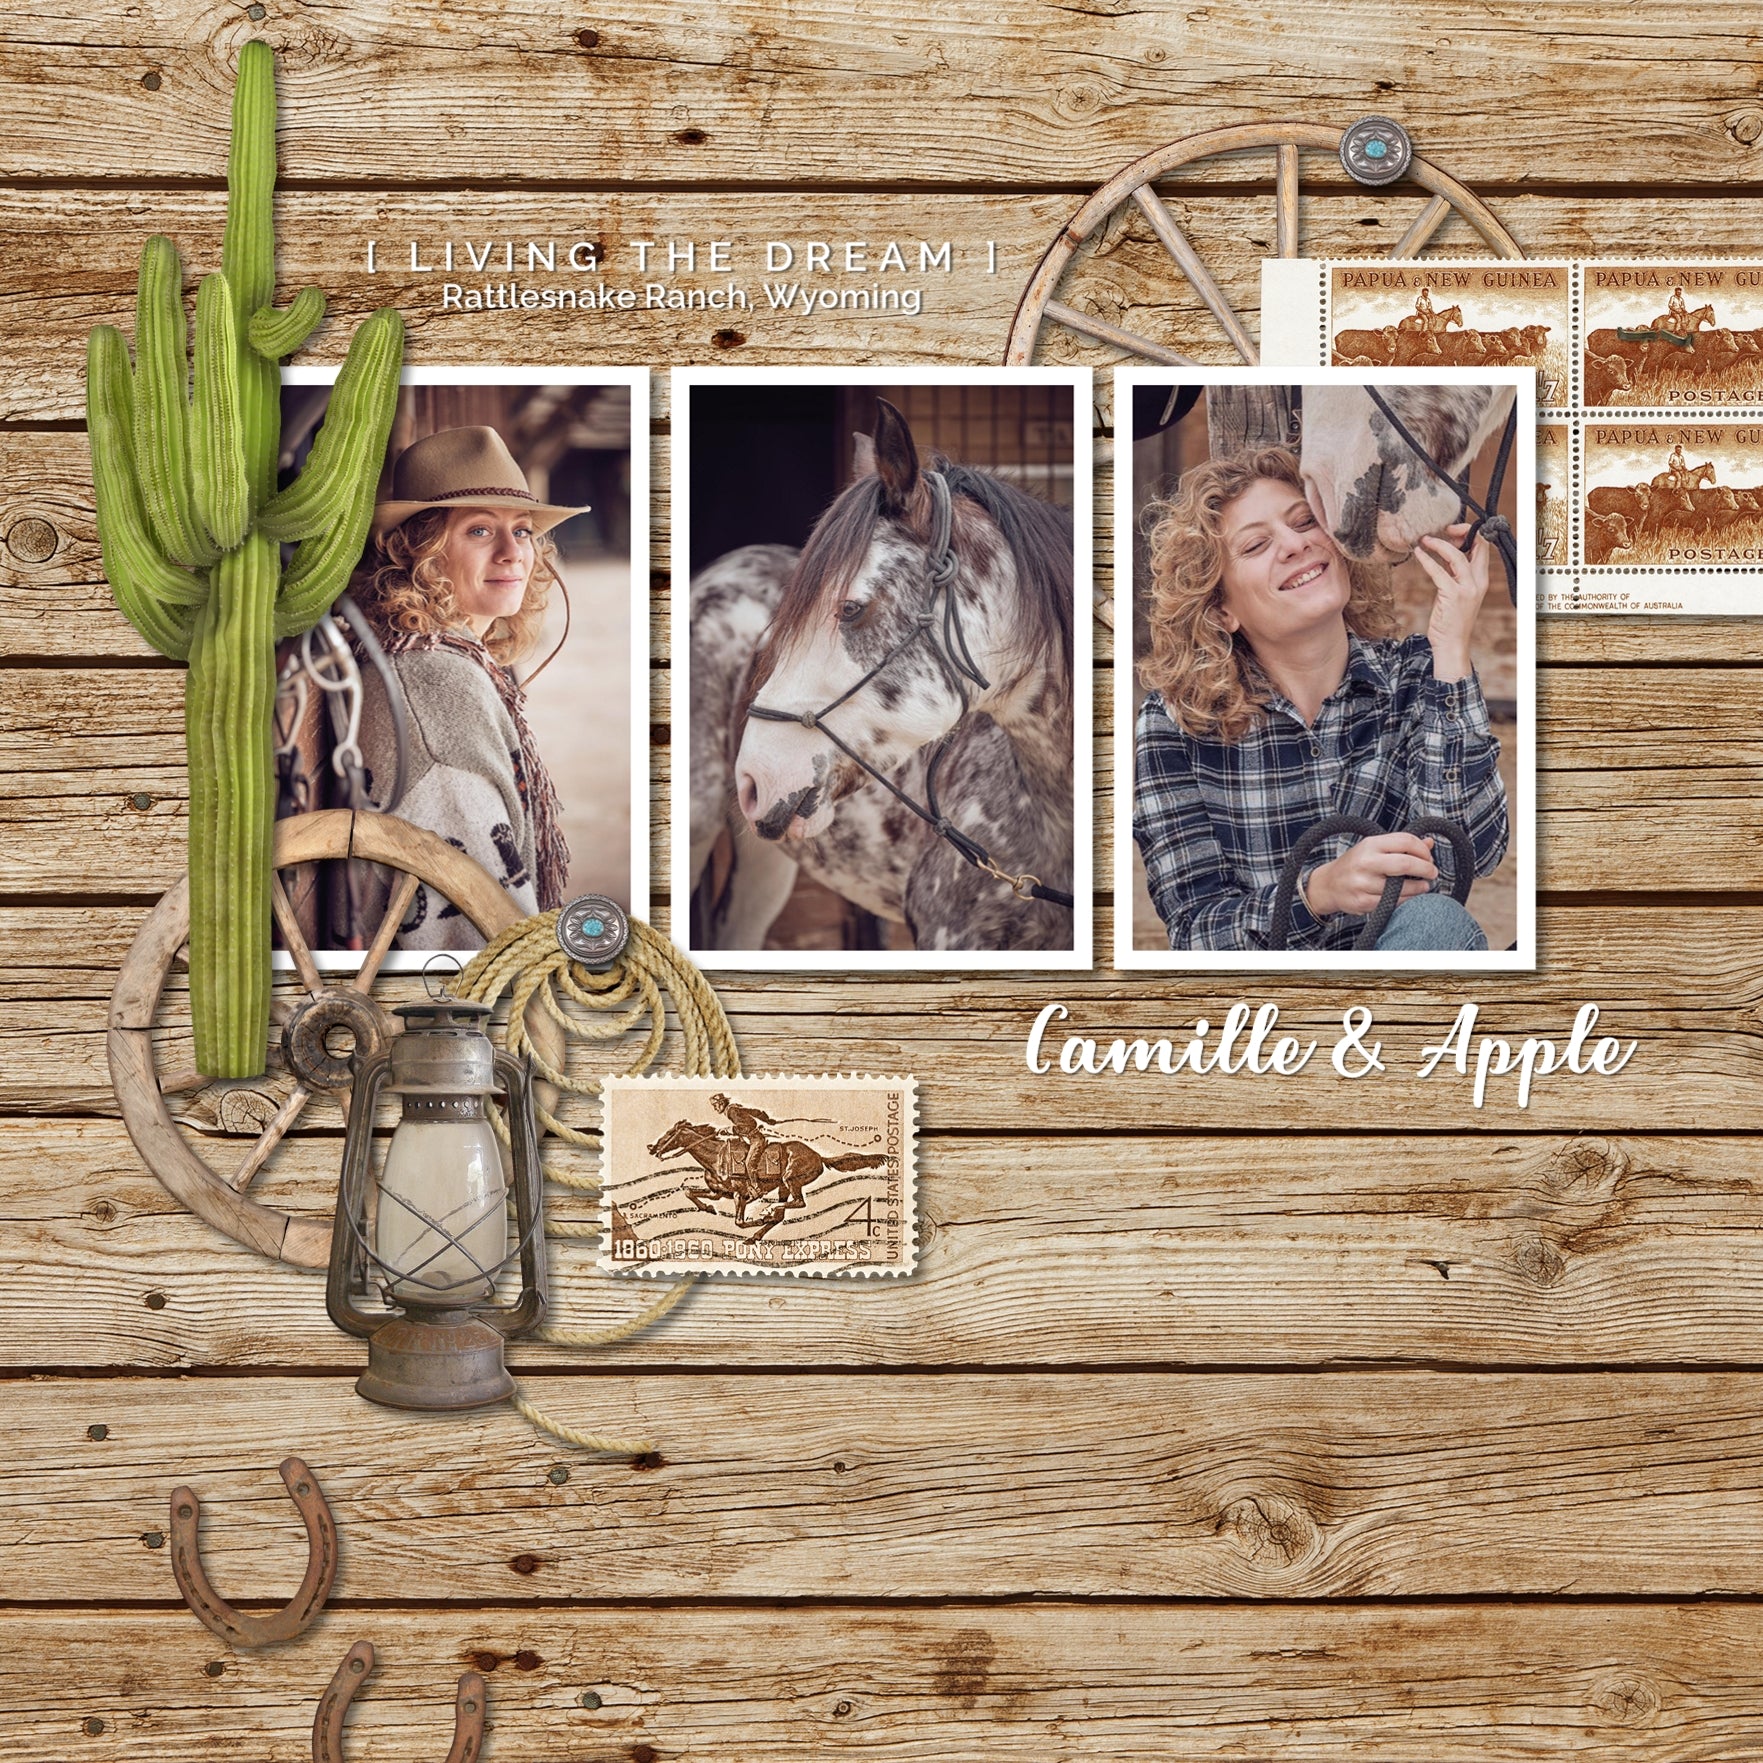 The antique color palette in the American Wild West 3 Digital Scrapbook Kit features western-themed digital art focusing on cowboy life on the prairie. Included are many western elements such as cowboy boots and spurs, sheriff badges, open wagons, covered wagon, ropes and rope frames, lantern, skulls, wagon wheels, belt buckles, cactus, windmill, cast iron skillet, saddle, saddle bag, guns, nails, powder horn, horseshoe, leather cuffs, dinner bell, barbed wire, pony express elements, and postage stamps.